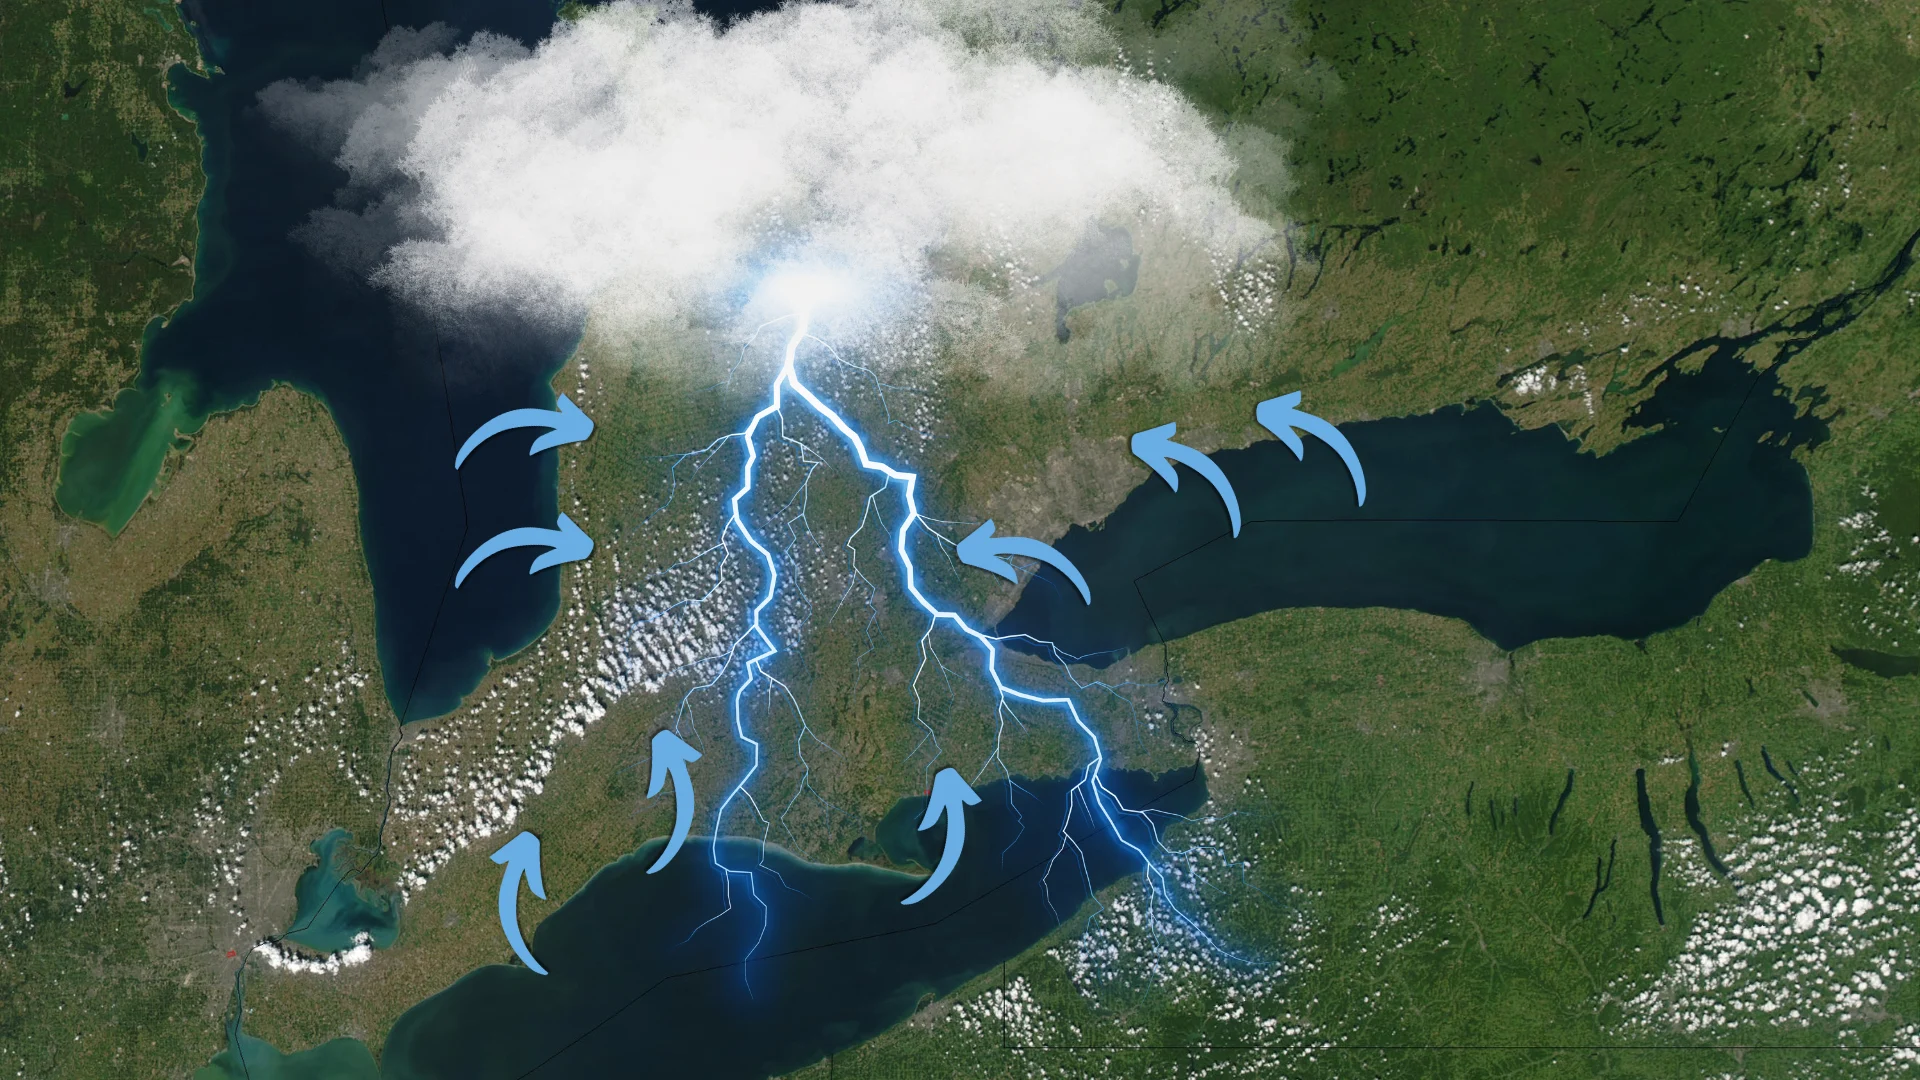 The Great Lakes may have a thunderous effect on your summer weather